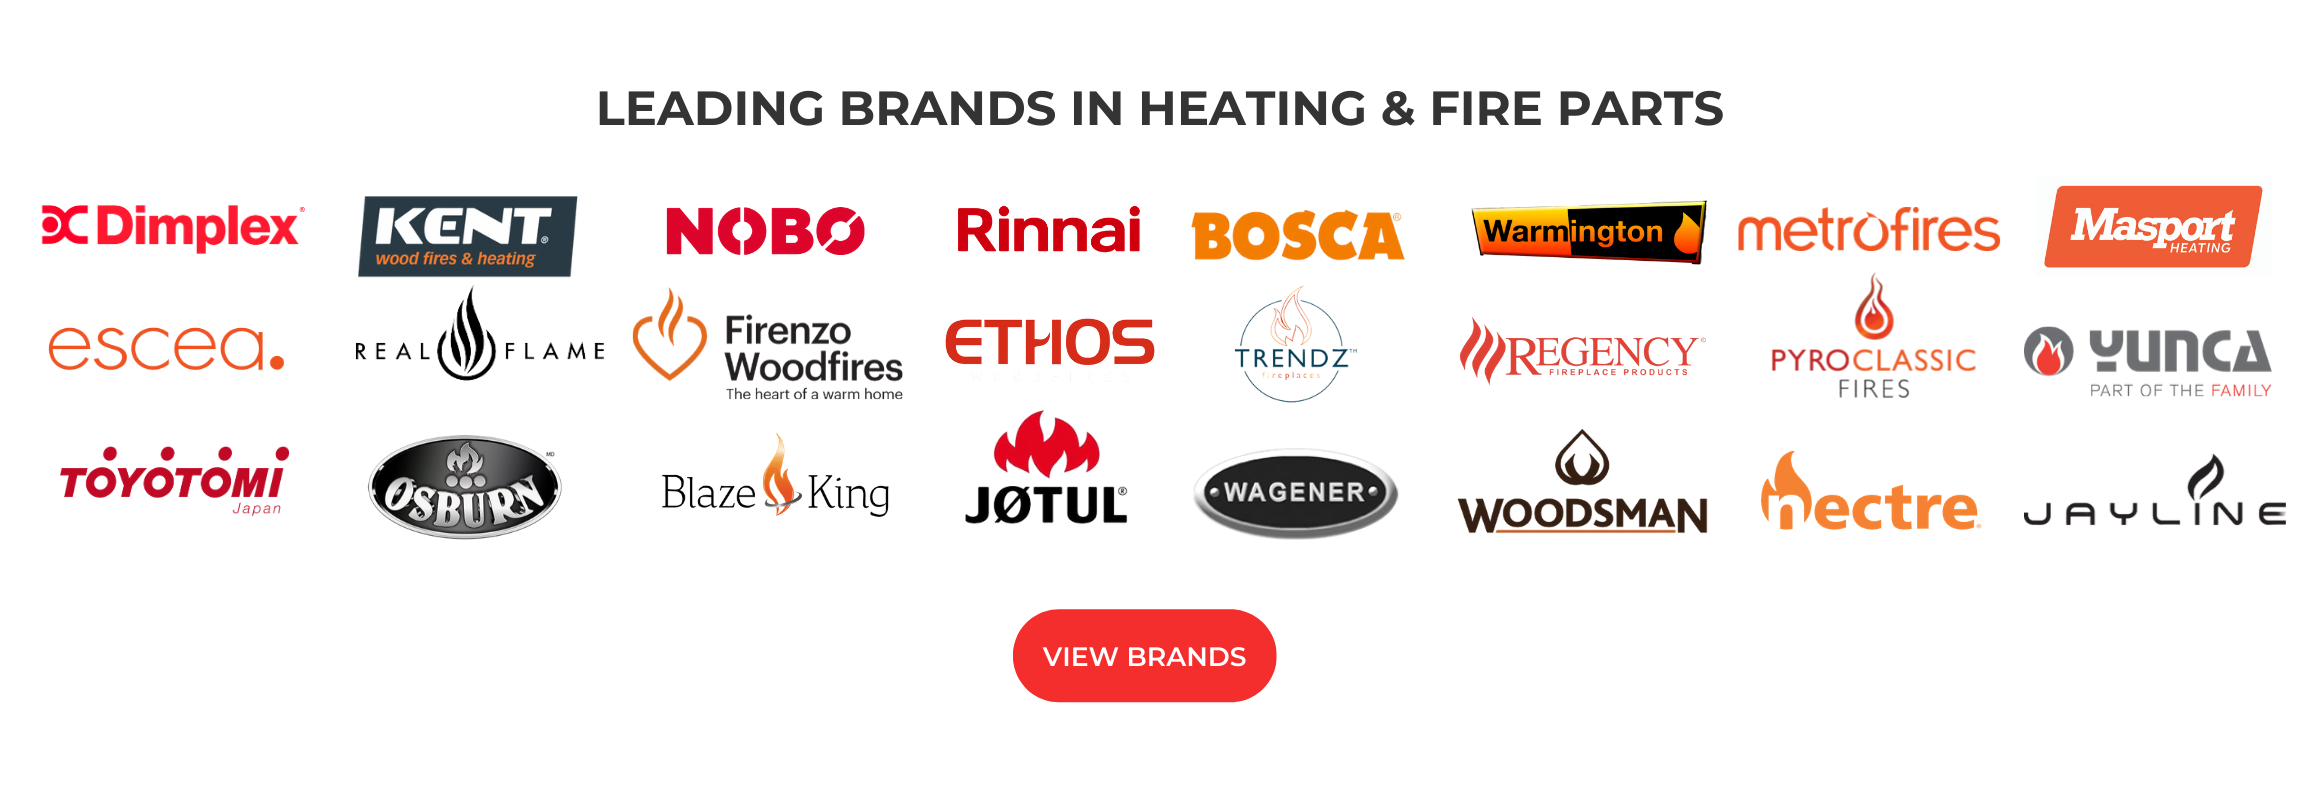 leading heating and fire brands